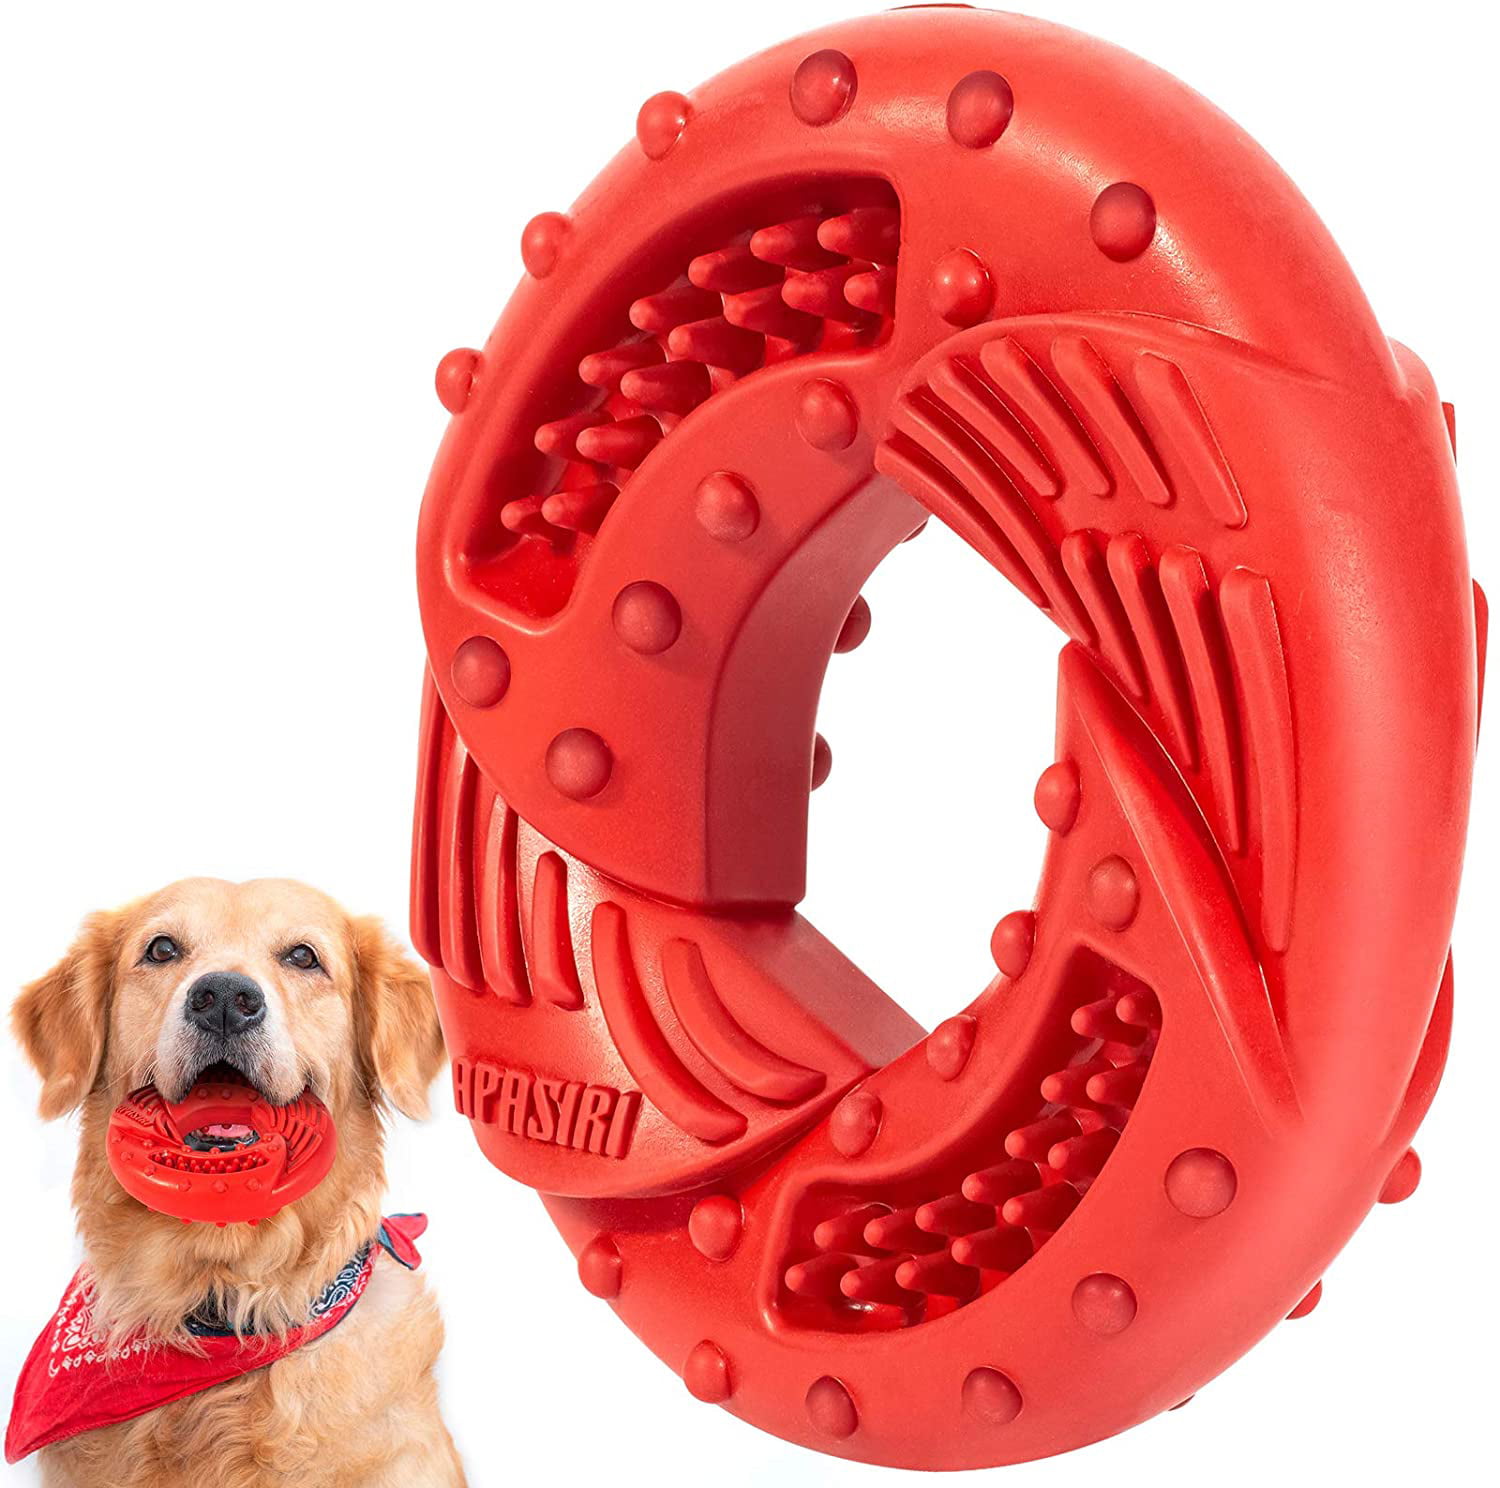 Rubber Large Medium Small Puppy Teething Chew Toys Almost Indestructible Tough Dog Toys Durable Ring Dog Interactive Toys Dog Toys for Aggressive Chewers Large Medium Breed Apasiri Dog Chew Toys 